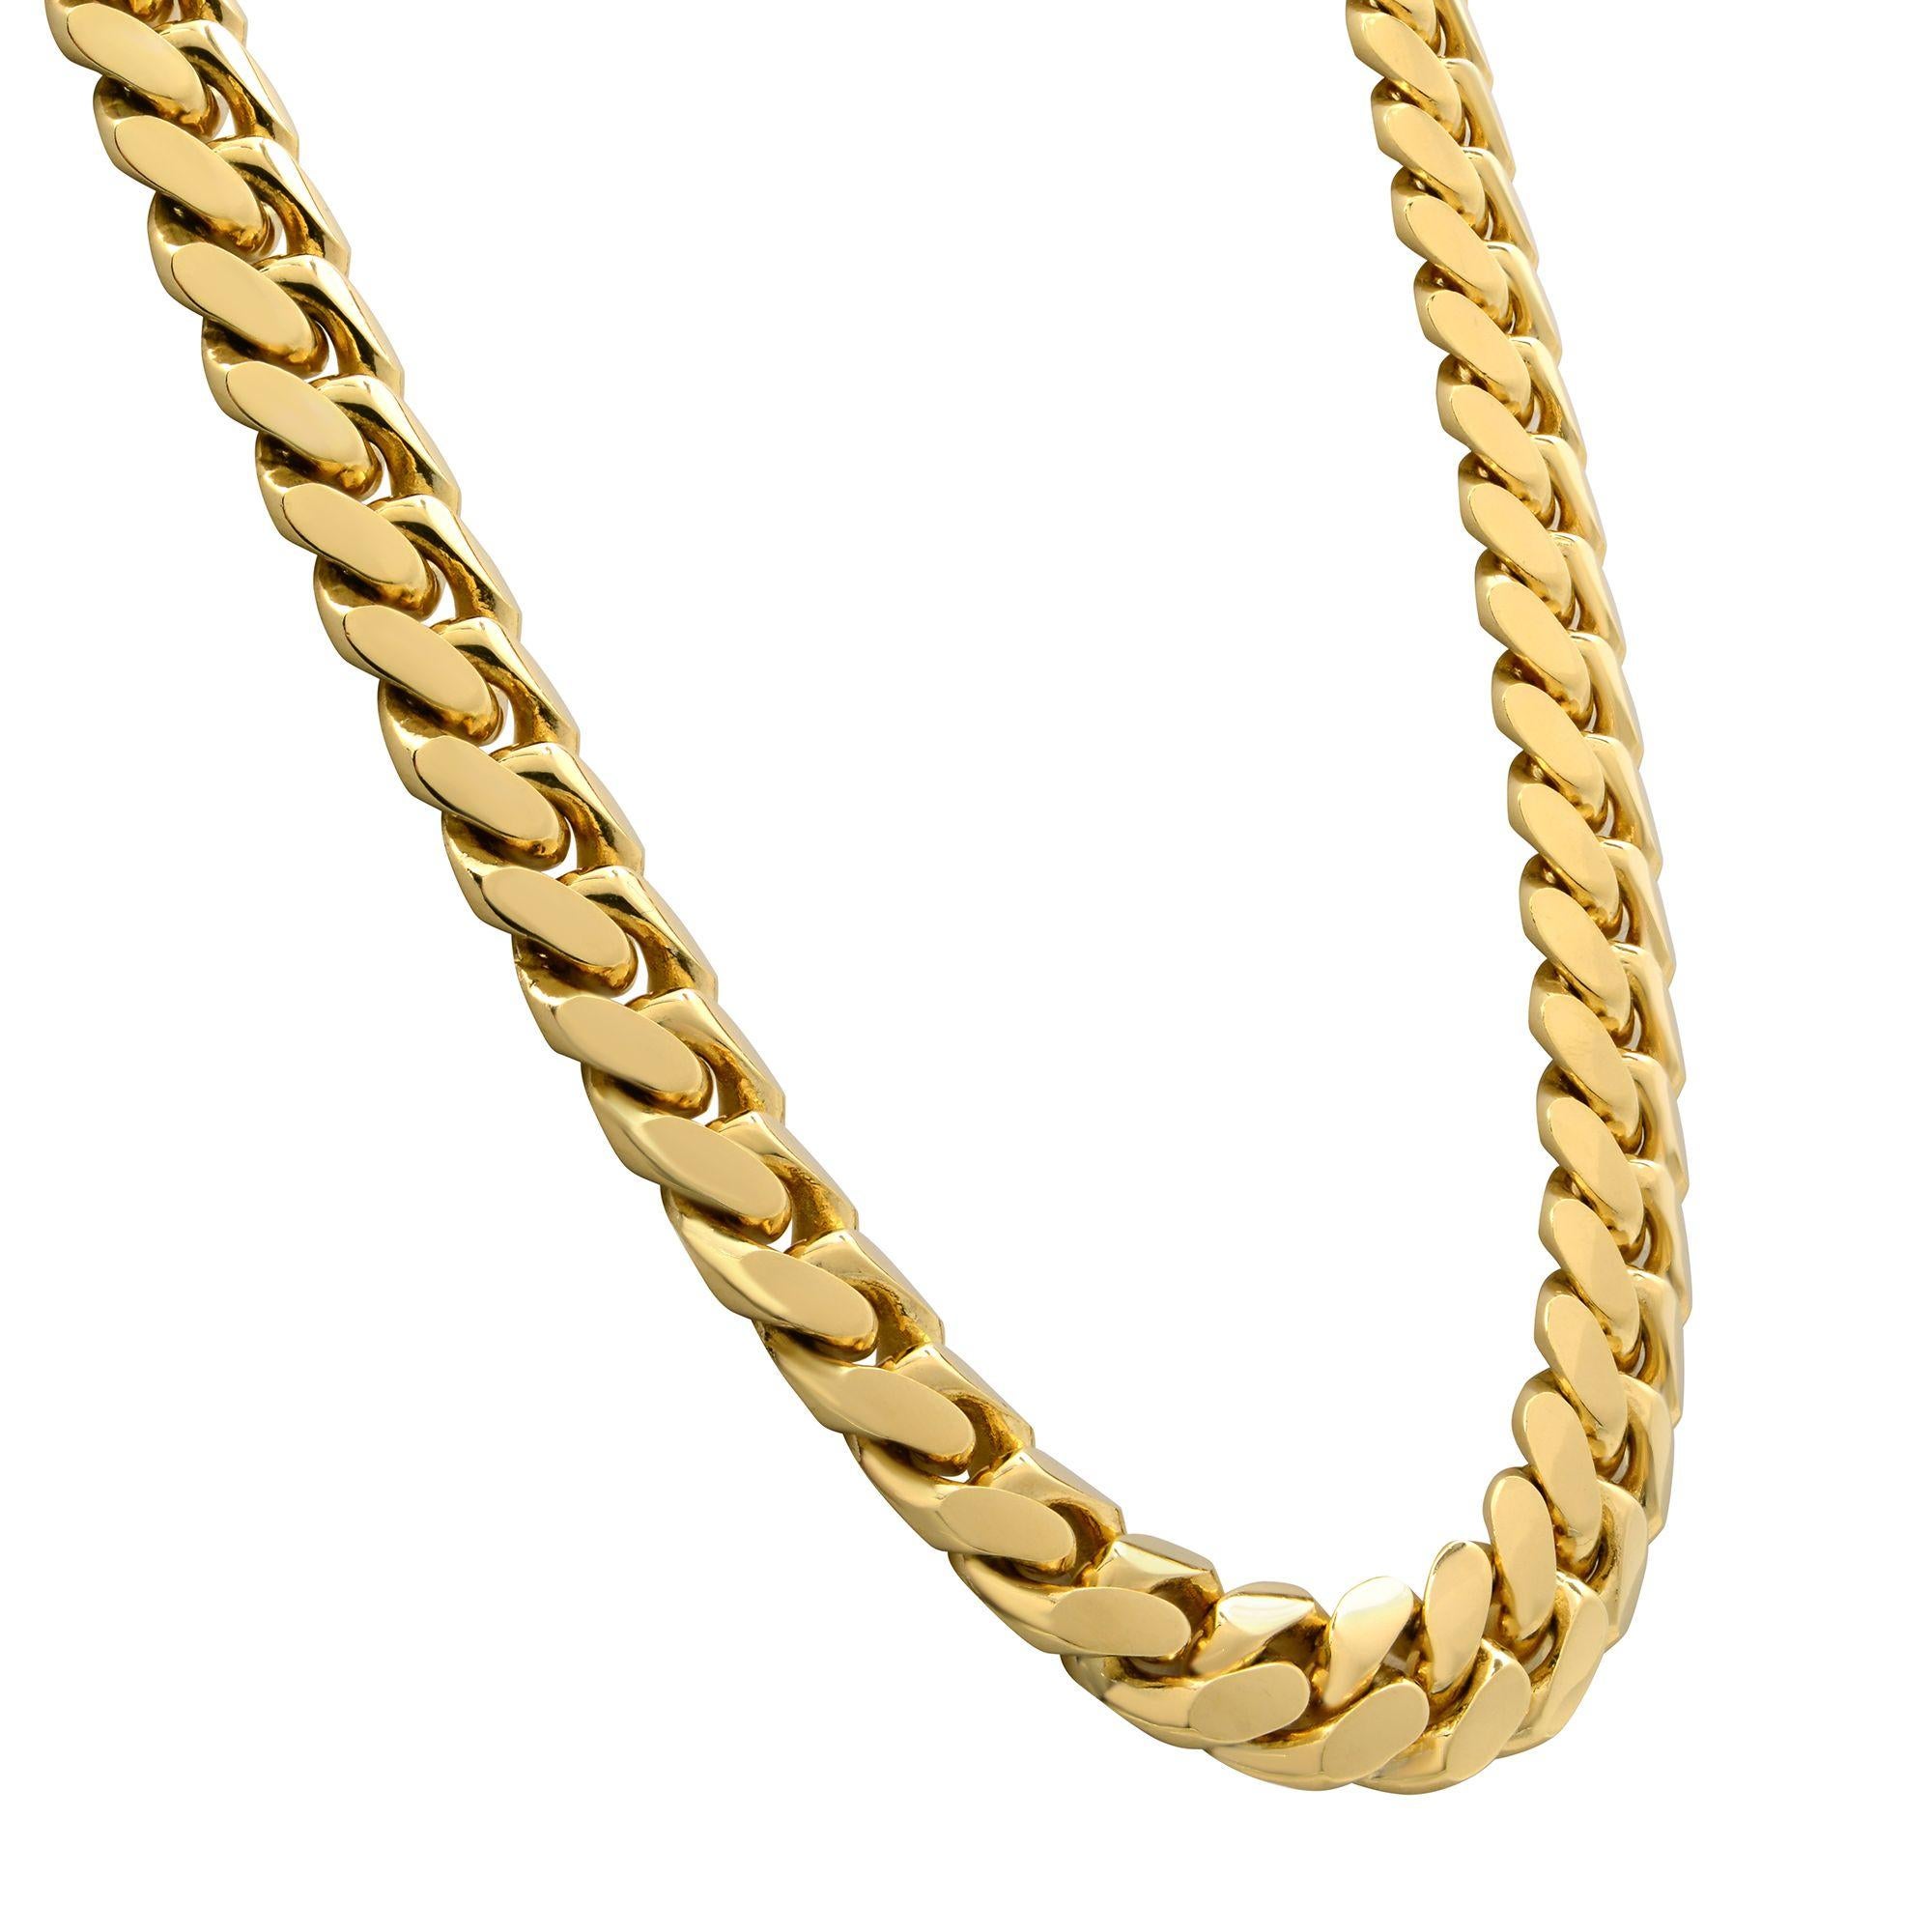 how to measure gold chain width